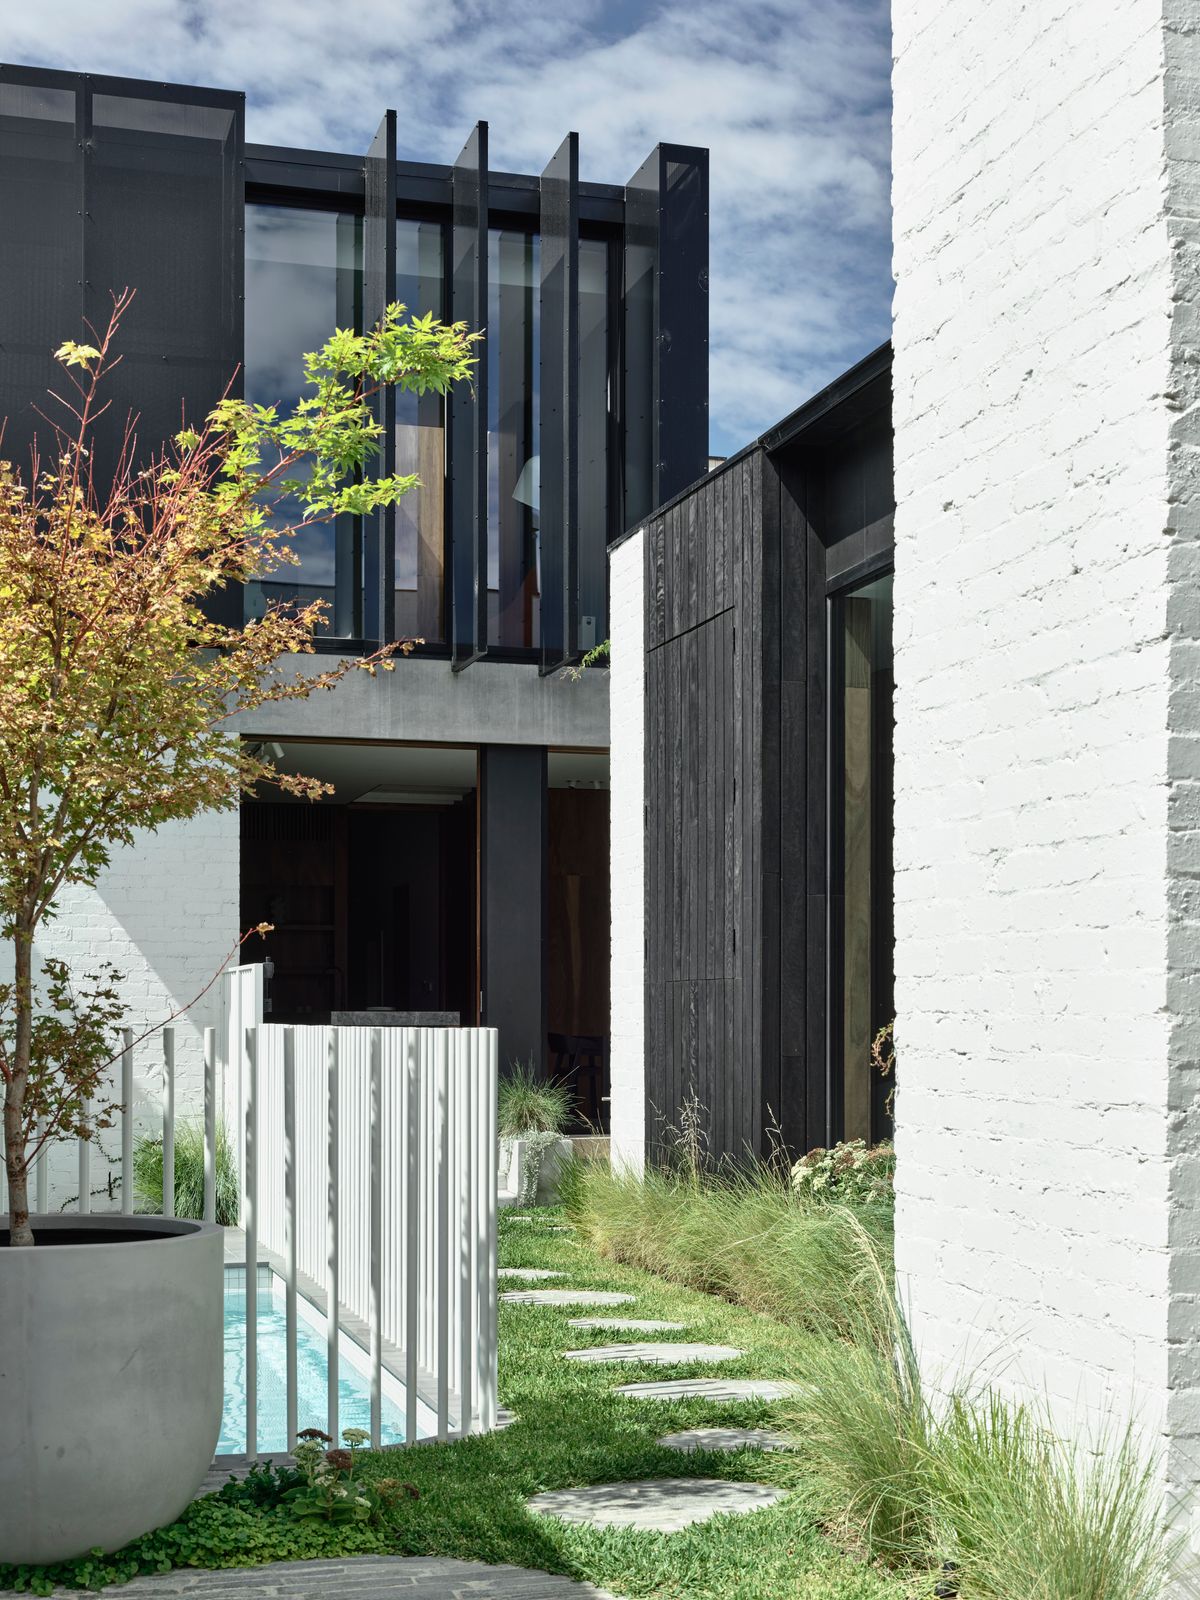 Carlton North Residence by Project 12 Architecture. Backyard view of new extension